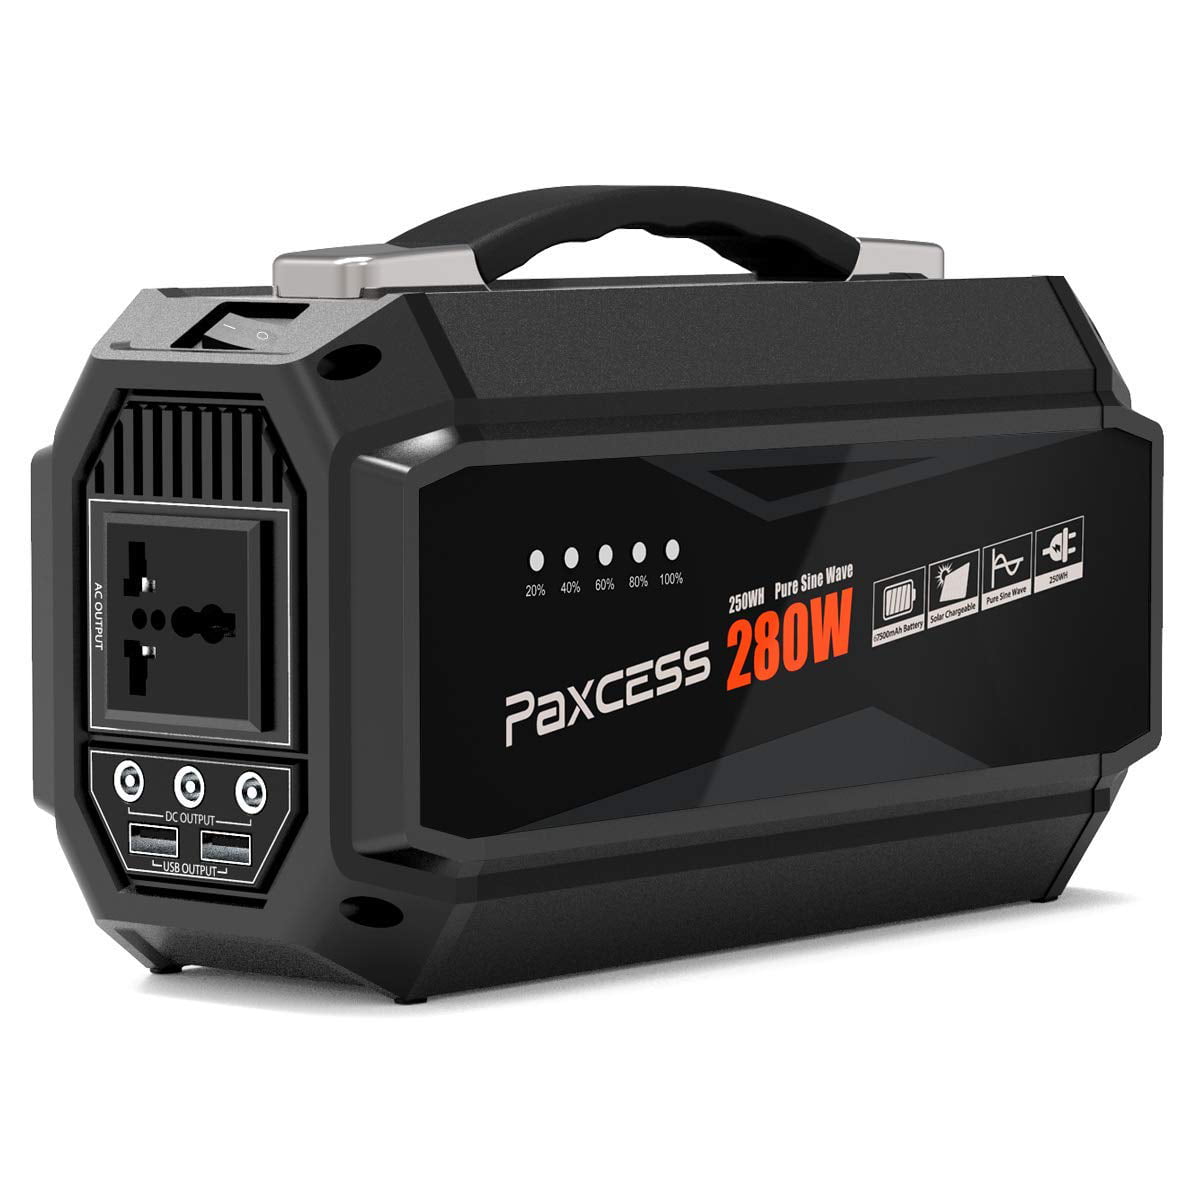 PAXCESS Generator Portable Power Station-280W Lithium Battery Pack 